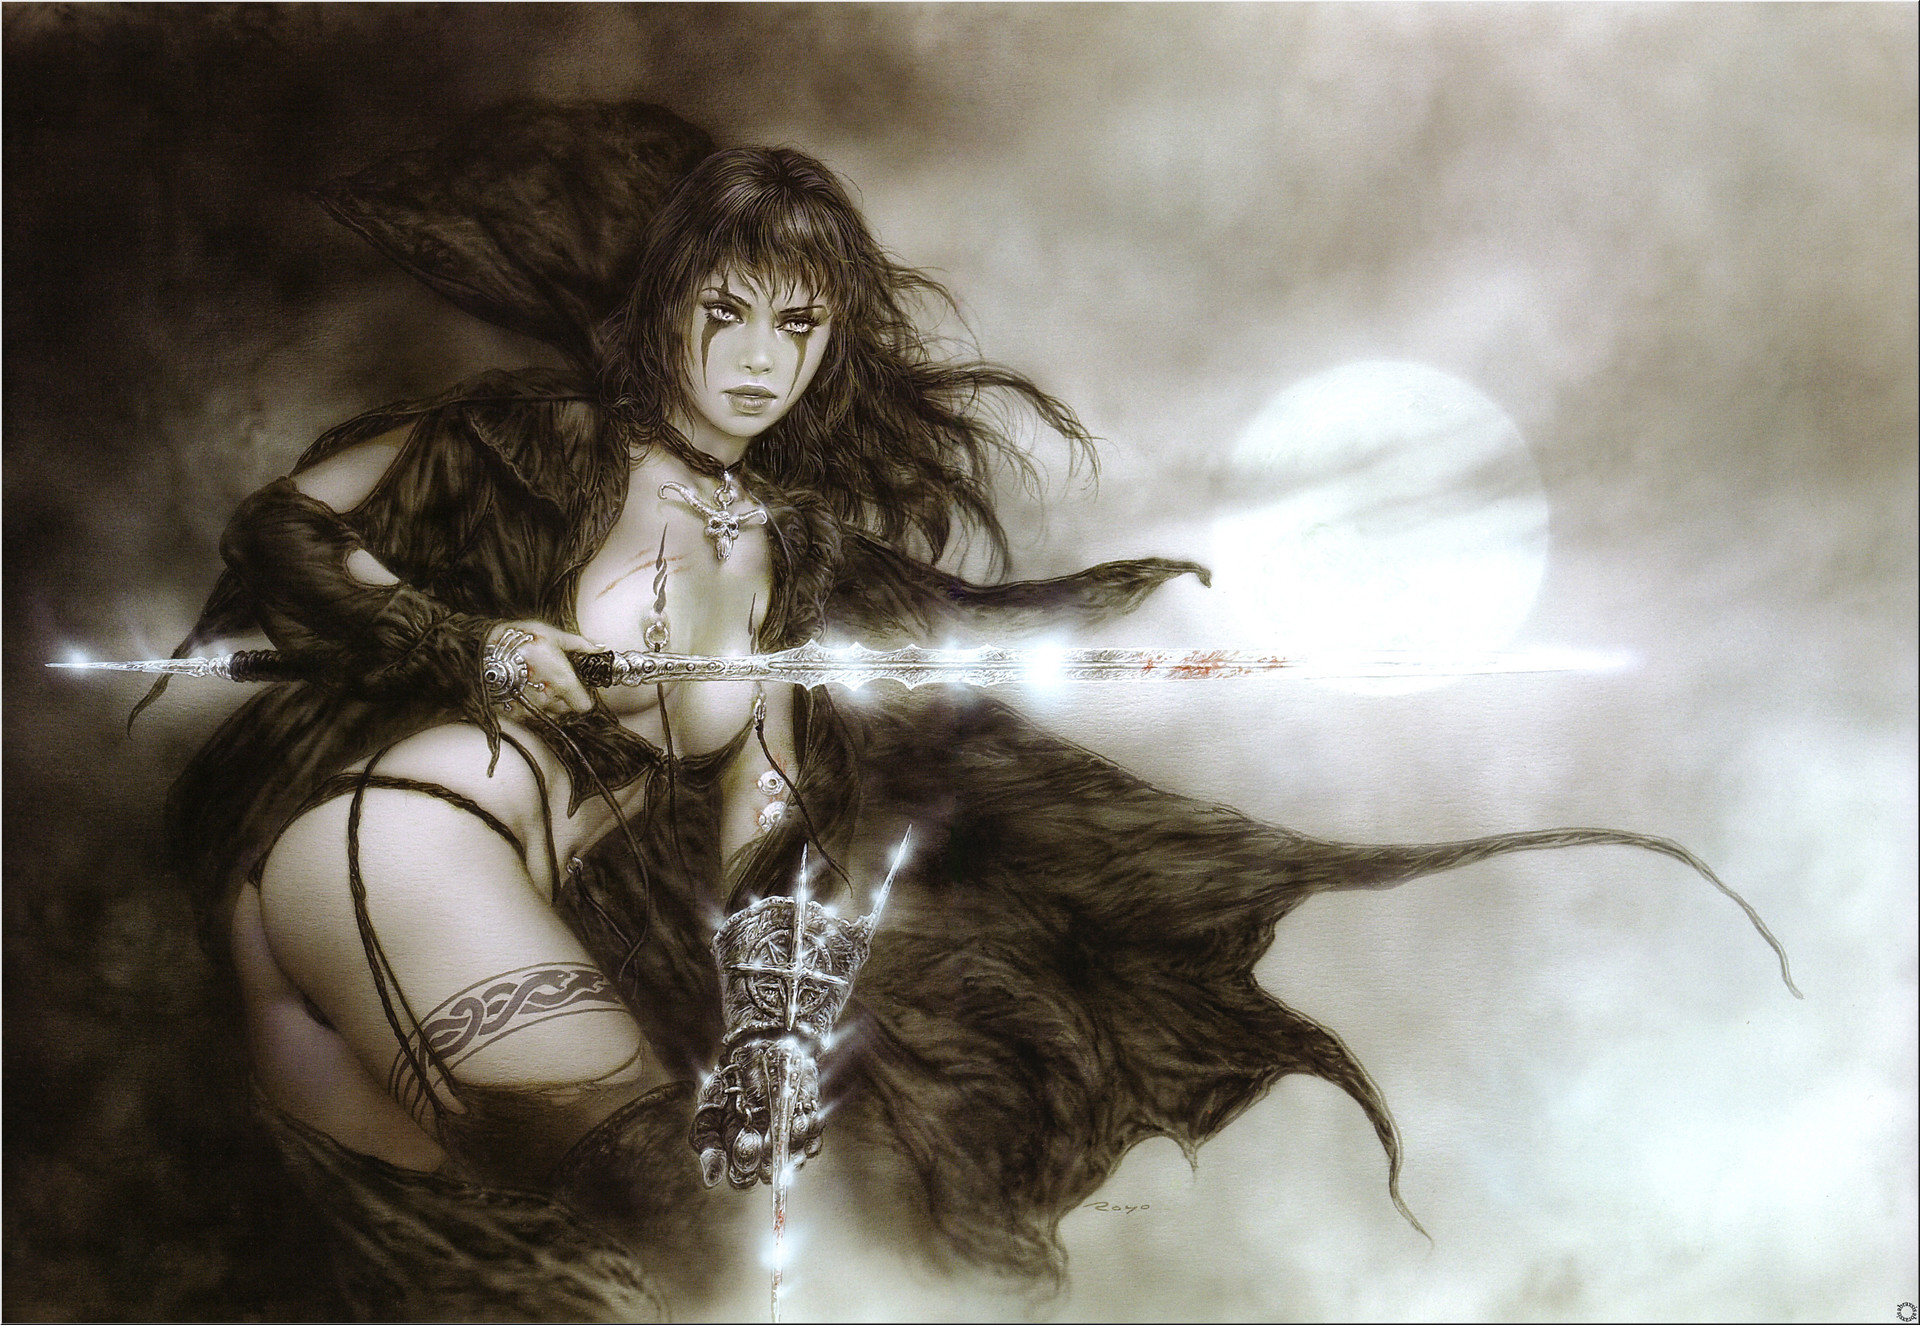 1920x1325 Luis Royo images Female Warrior Beauty HD wallpaper and background photos